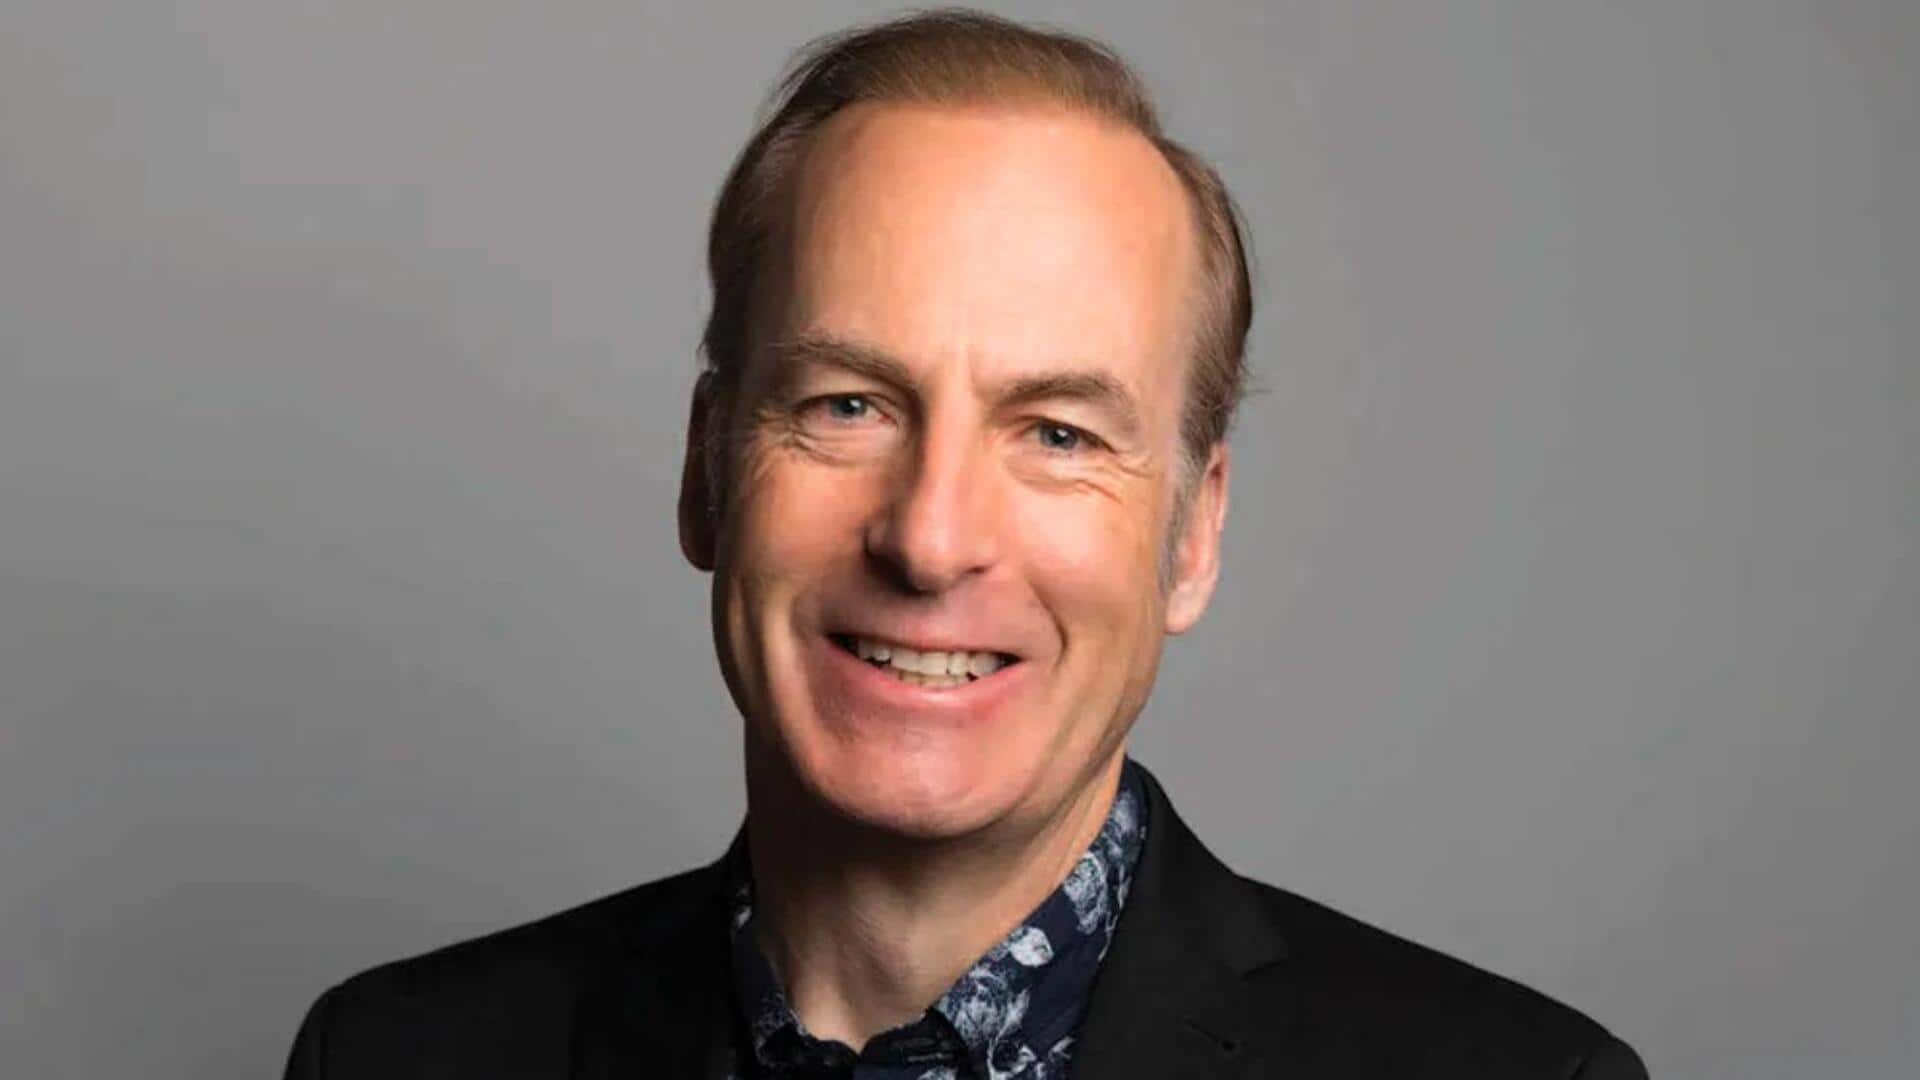 'Better Call Saul' star Bob Odenkirk is King Charles's cousin